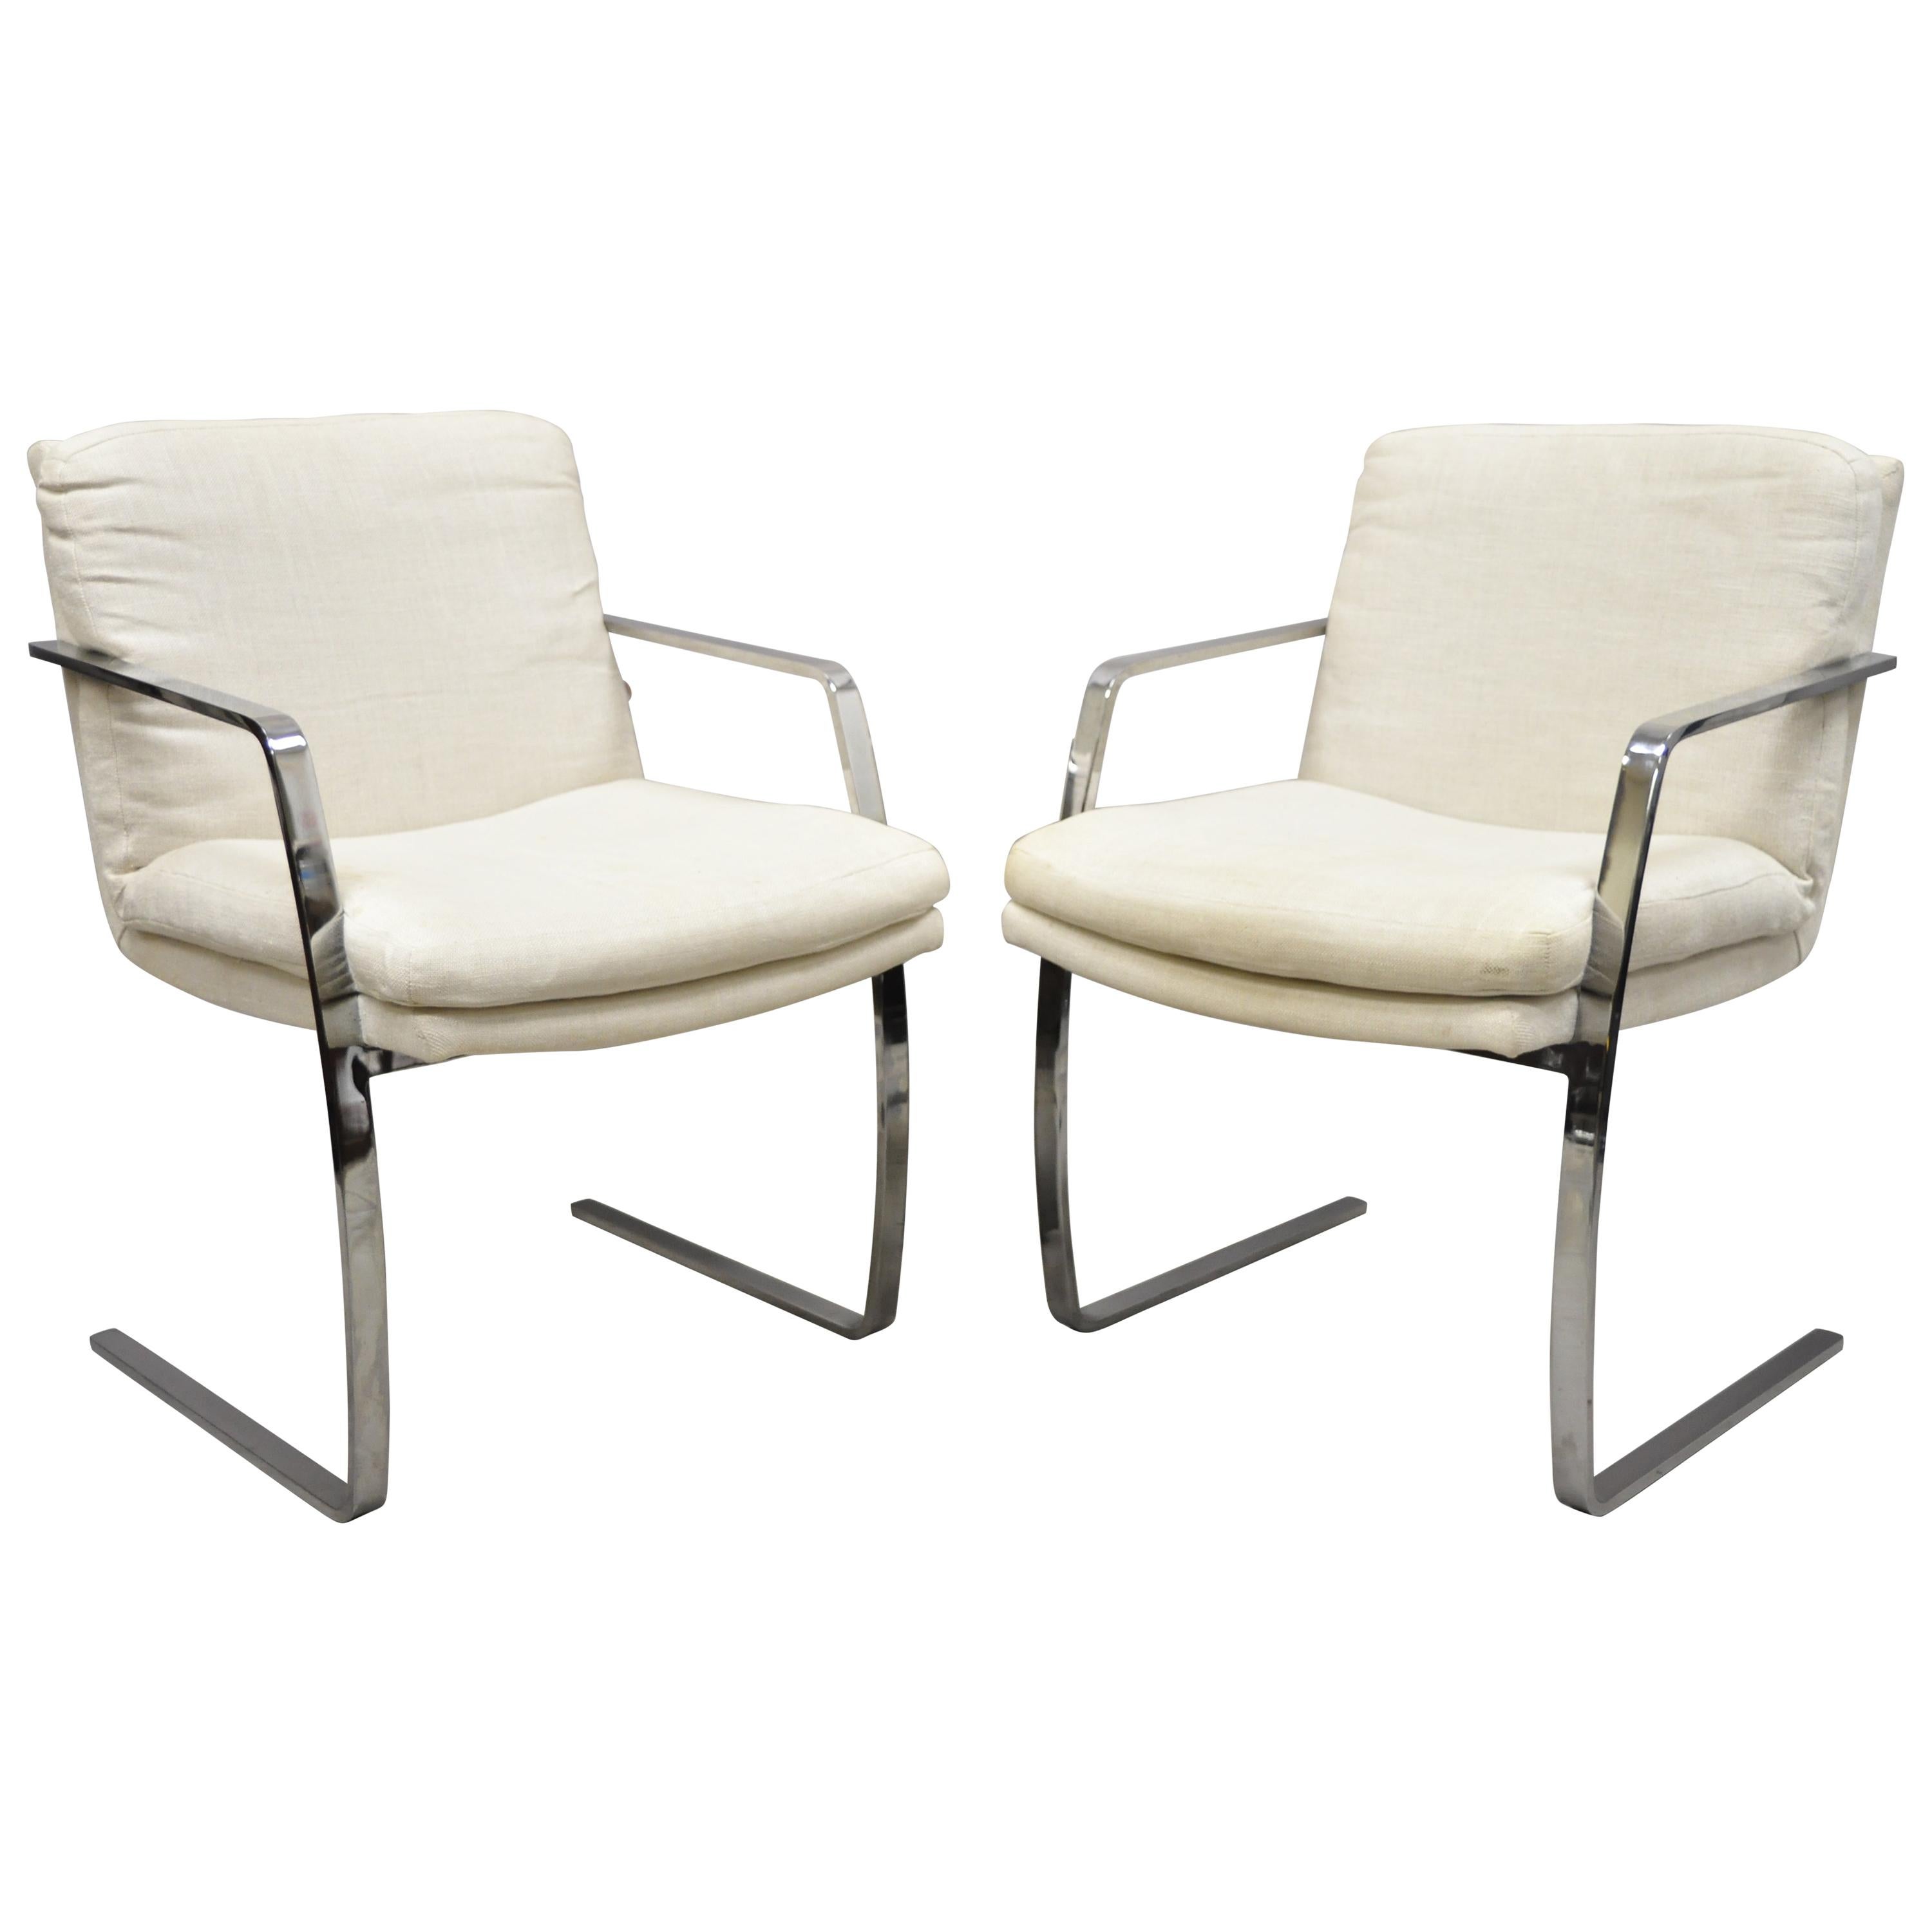 Mid-Century Modern BRNO Style Chrome Cantilever Lounge Armchairs 'B', a Pair For Sale